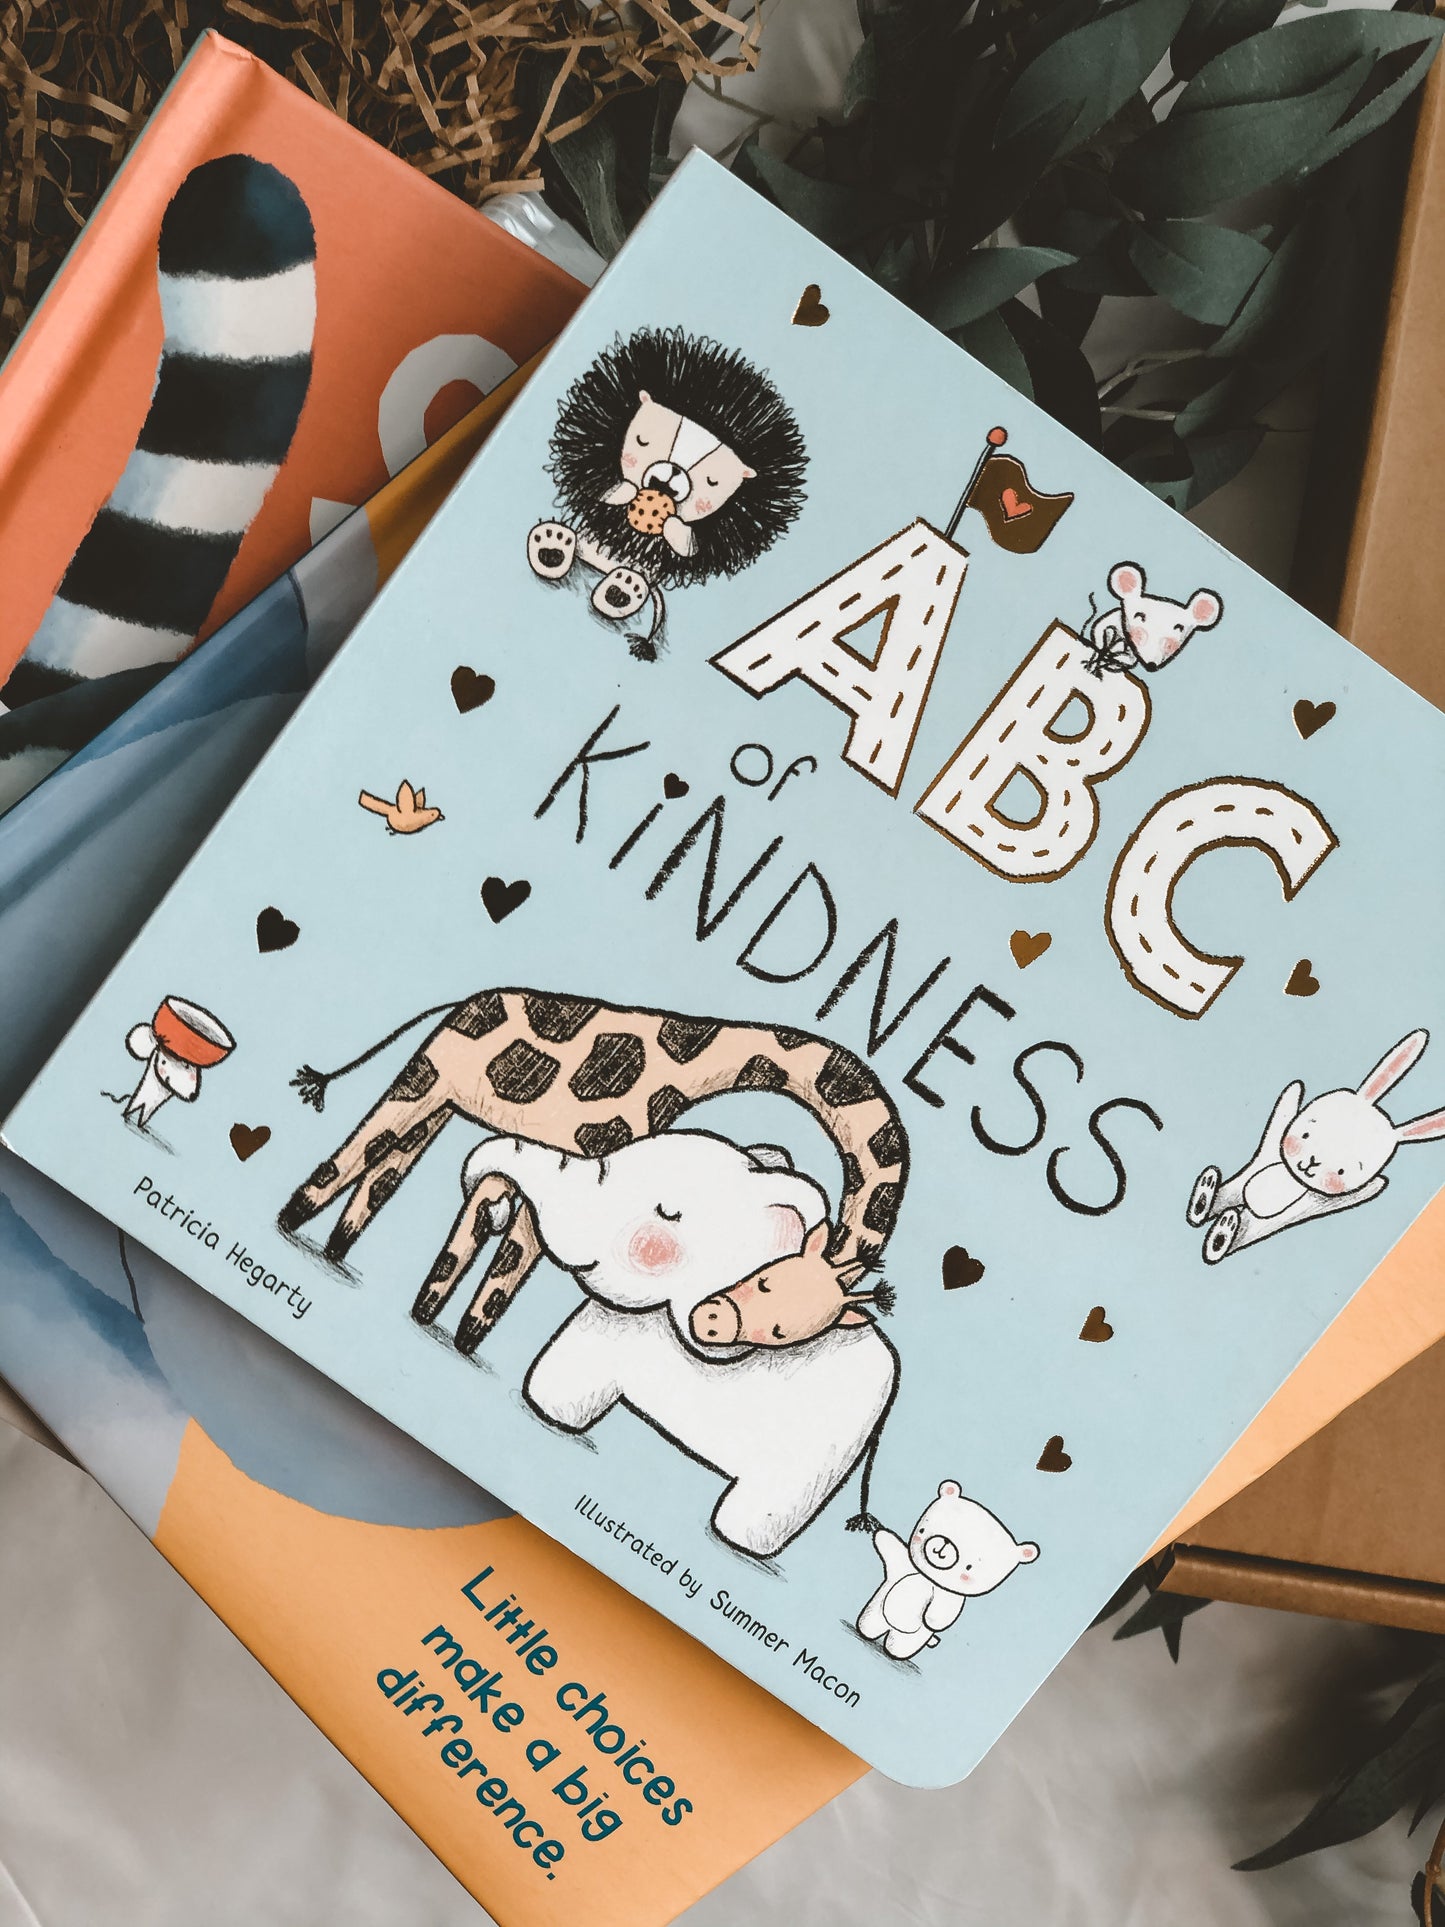 Abc Of Kindness by Patrica Hegarty - WERONE